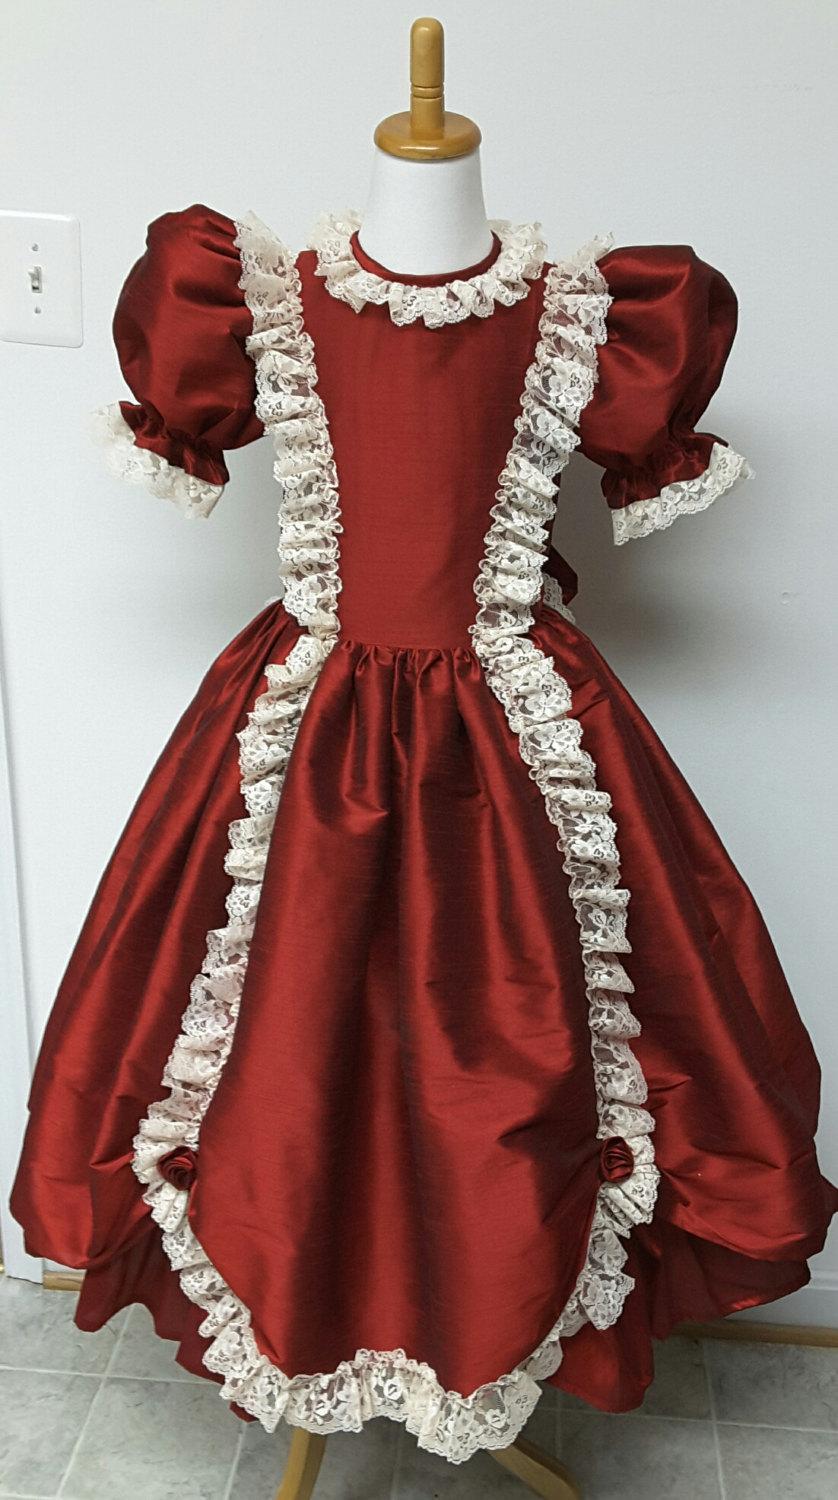 Wedding - Princess Dress with Ruffles. Lace. Puffy Sleeves. Girls Victorian Style Dress. Weddings, Birthday. Ballet. Optional Pantaloons available